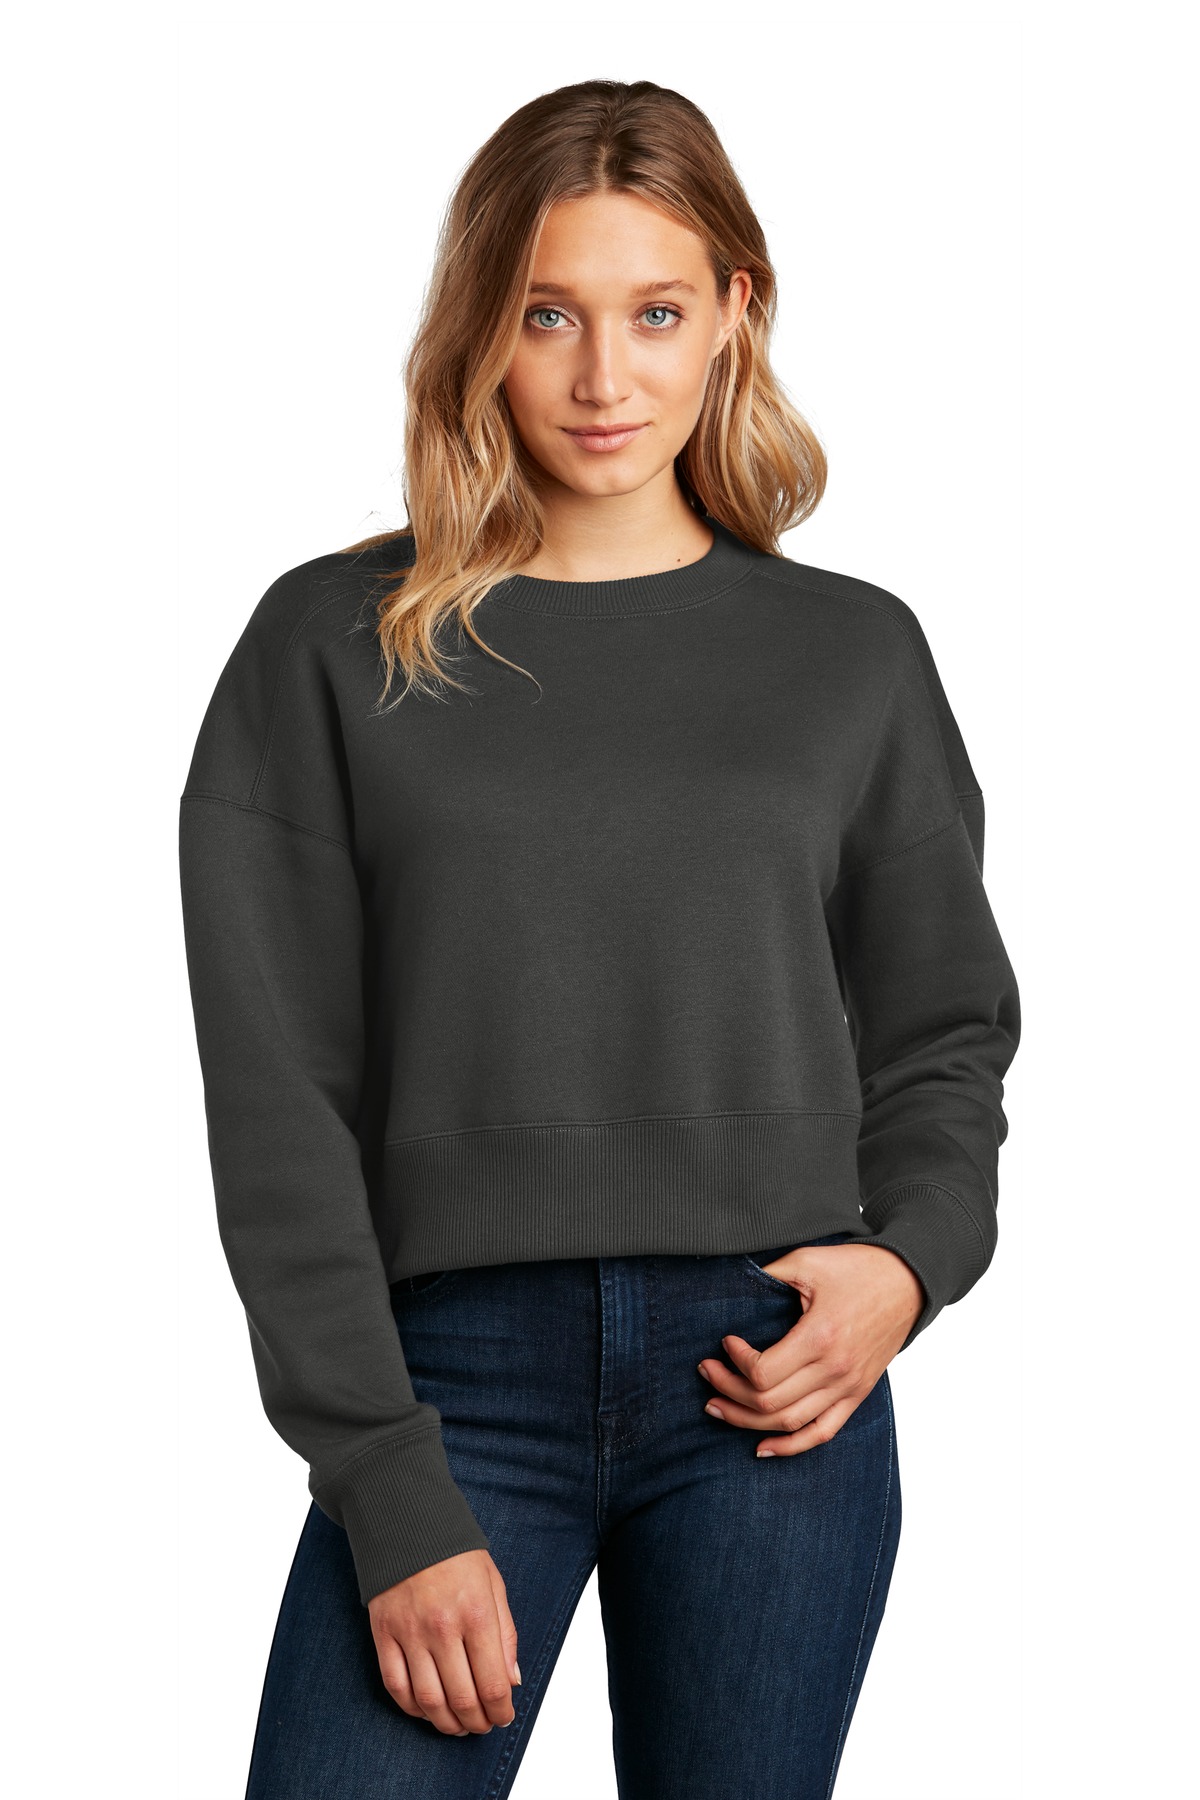 District Women's Perfect Weight Fleece Cropped Crew...